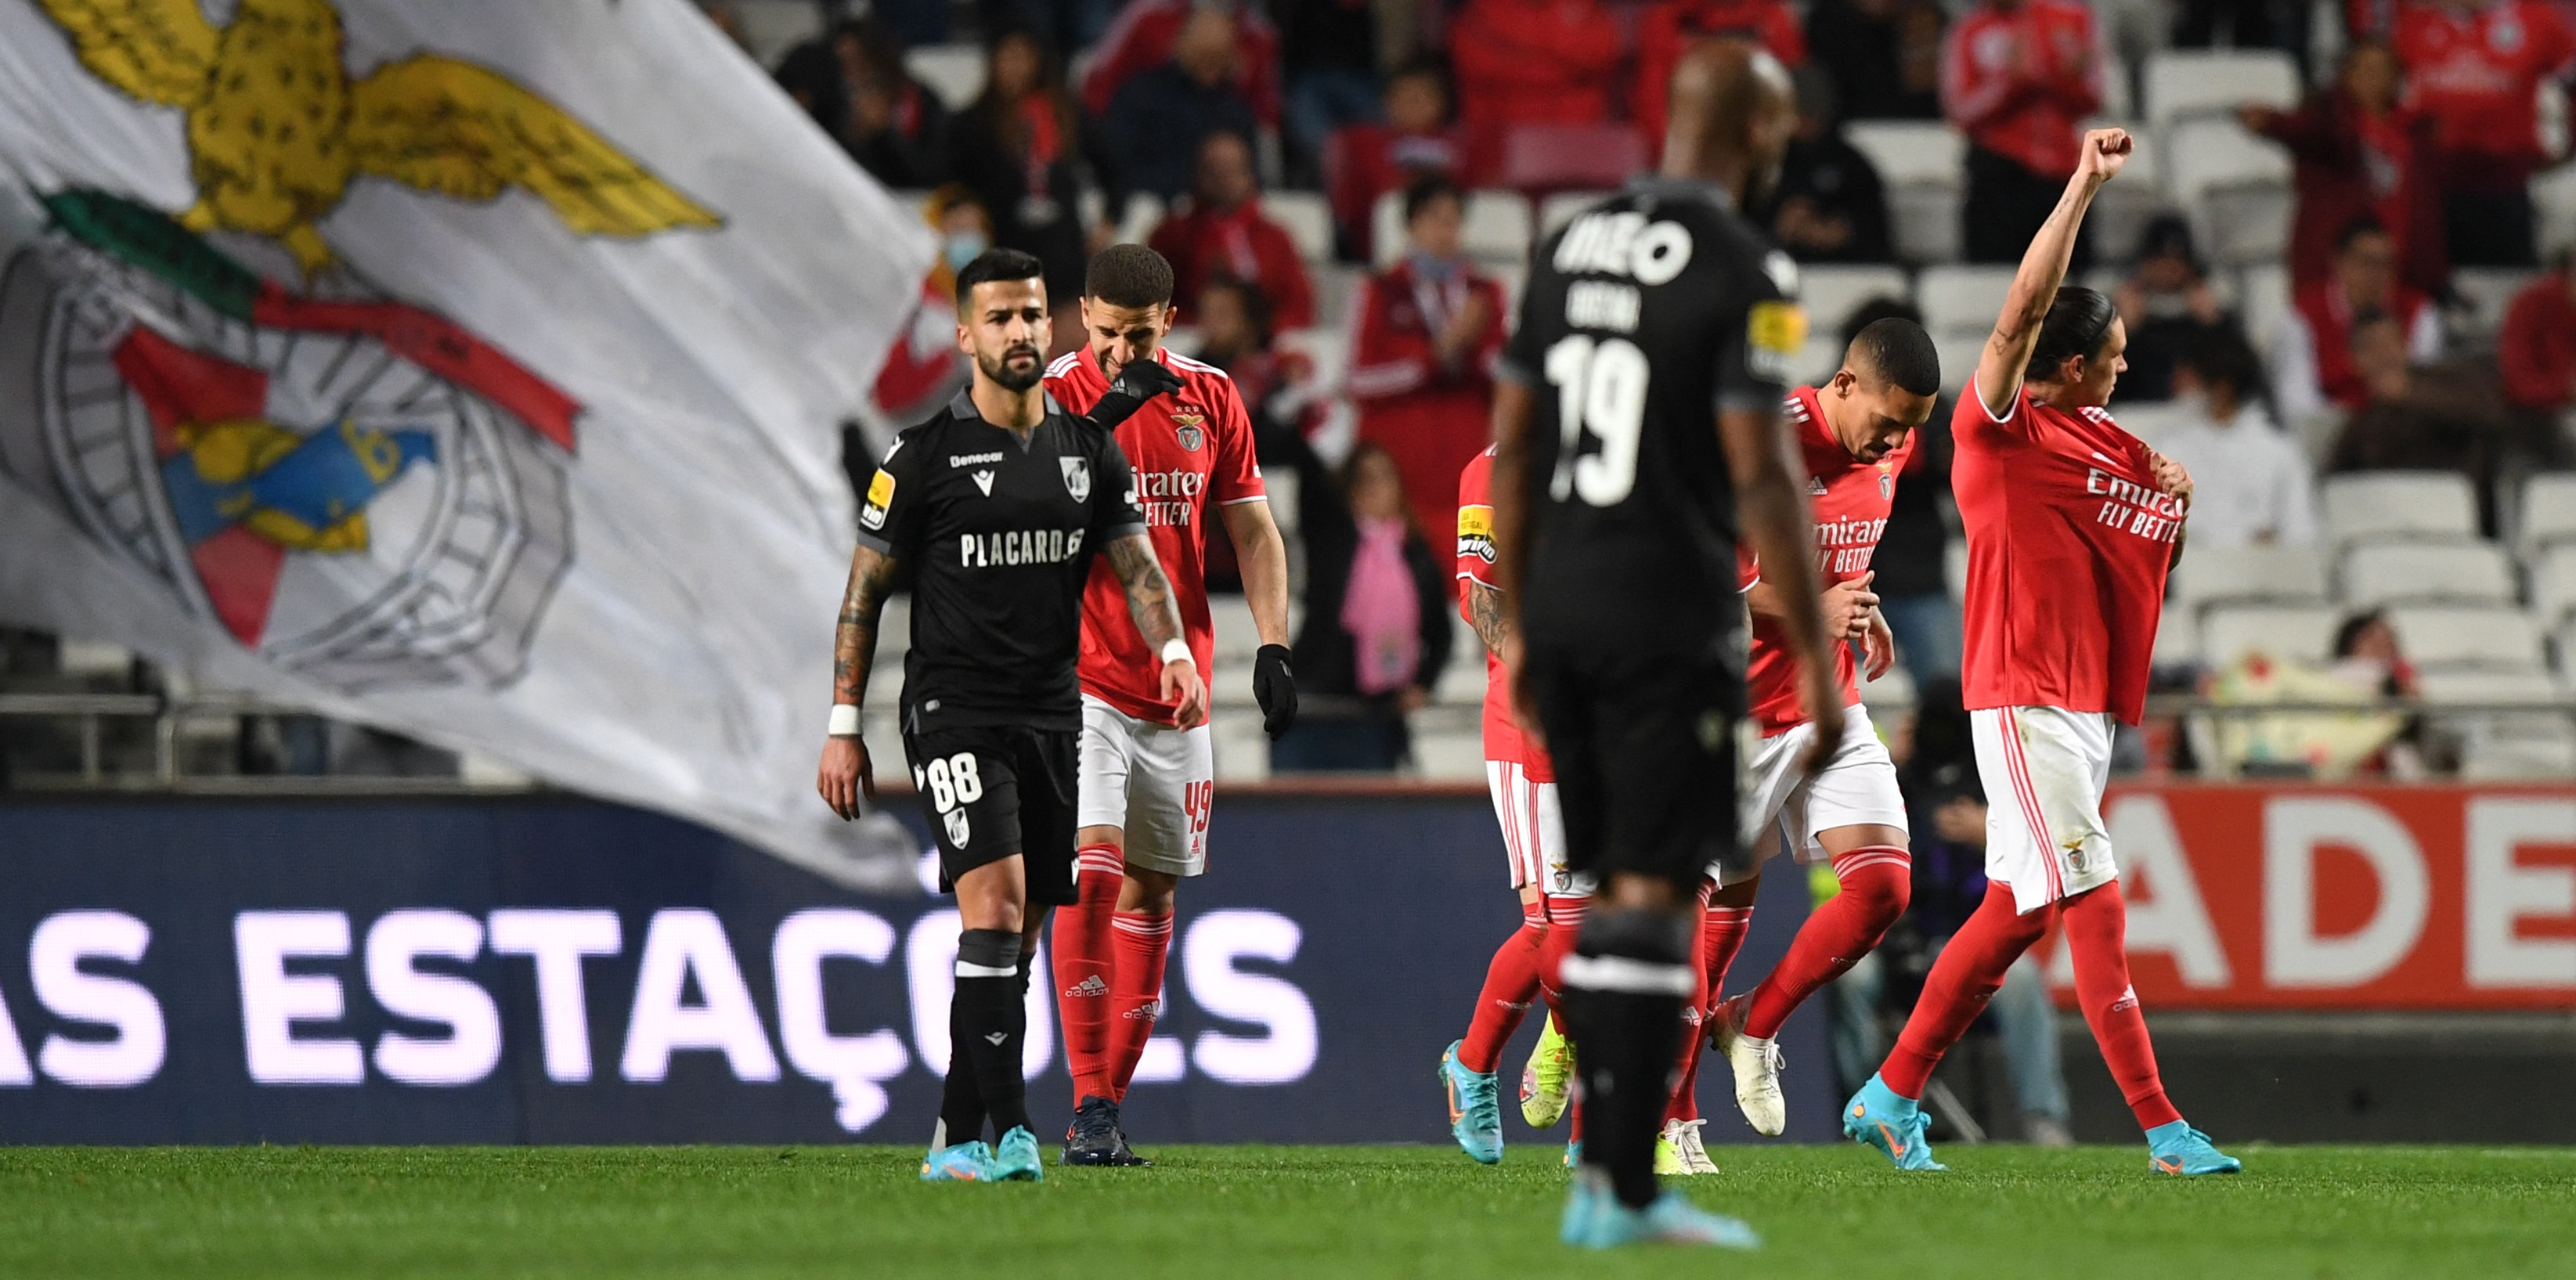 Liverpool interested in 22-year-old with monstrous 25 goals in Primeira Liga; Reds backed for strong summer window – report